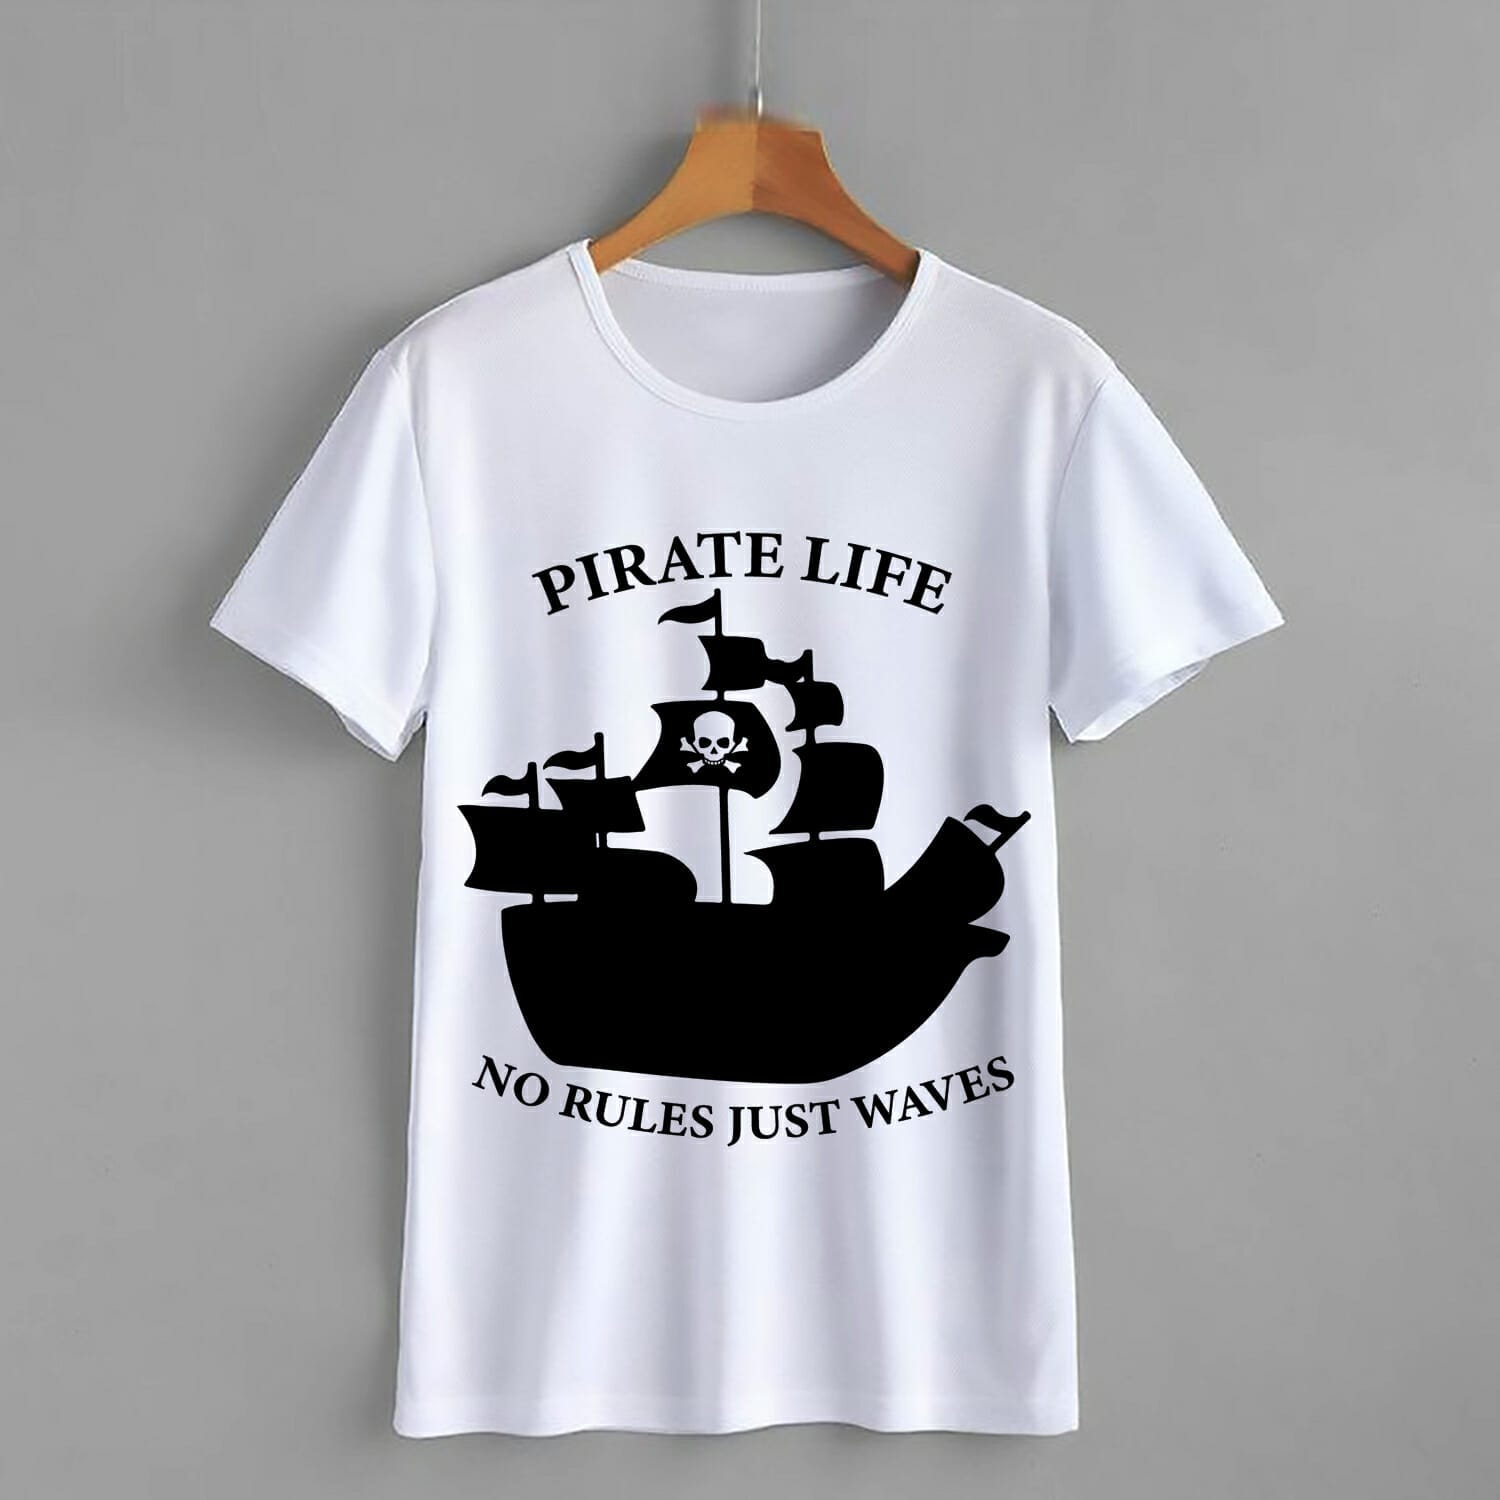 Pirate Life No Rules Just Waves T-Shirt Design